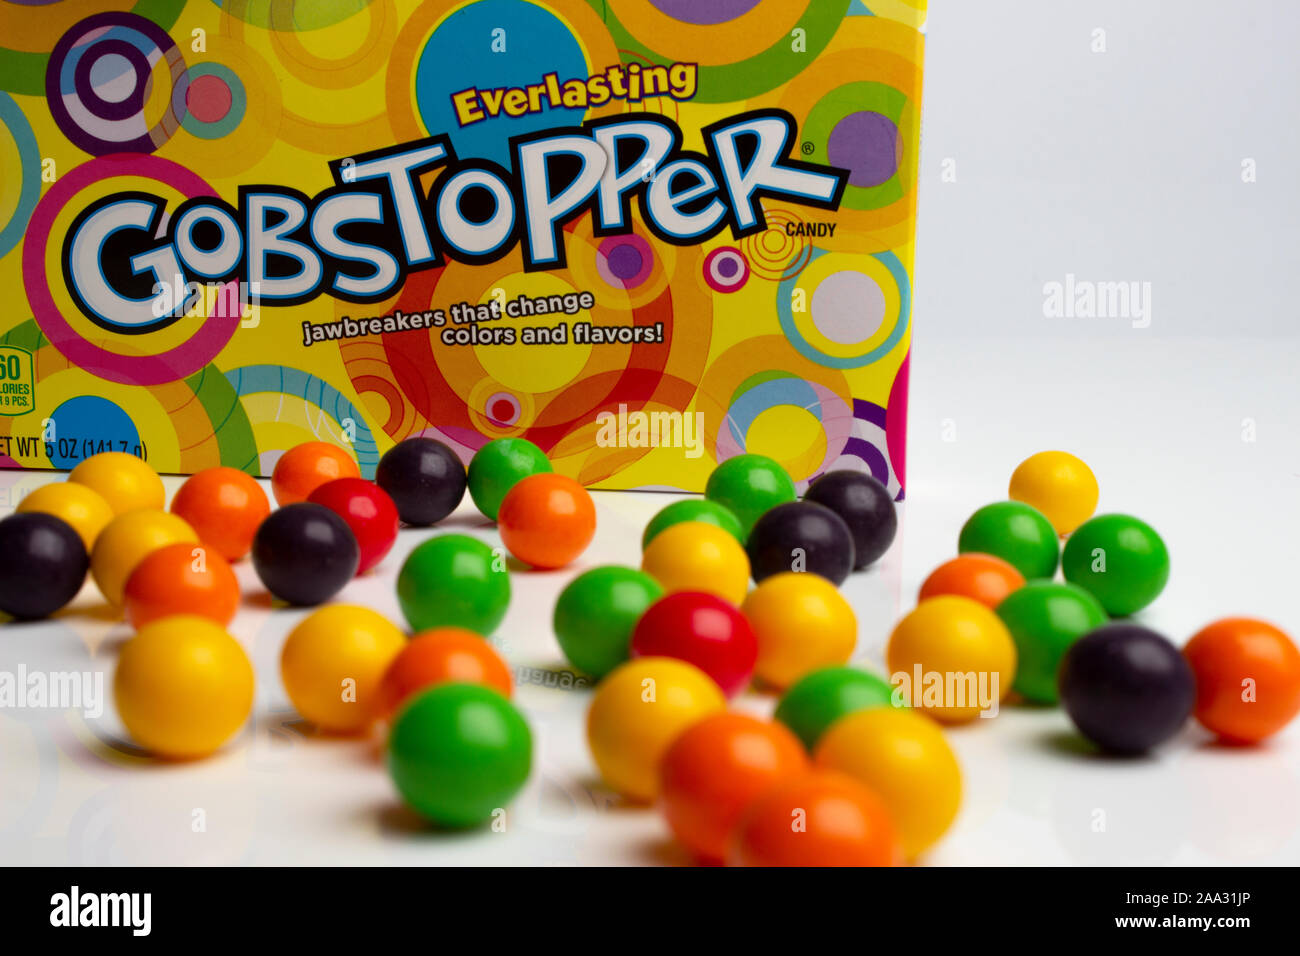 Gobstopper sweets still life product shot. Stock Photo